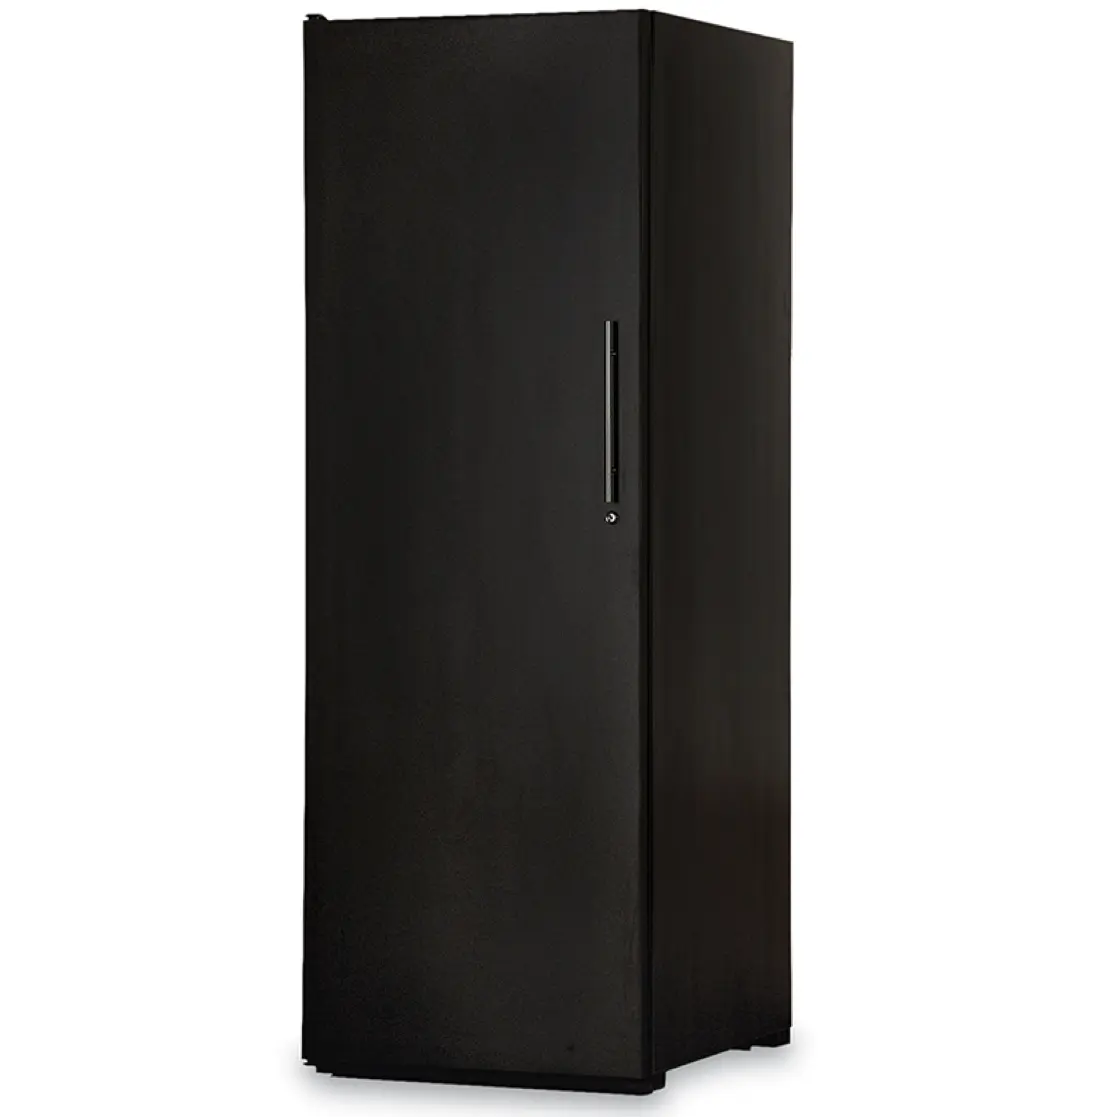 Click here to see more BILD styled wine cabinets